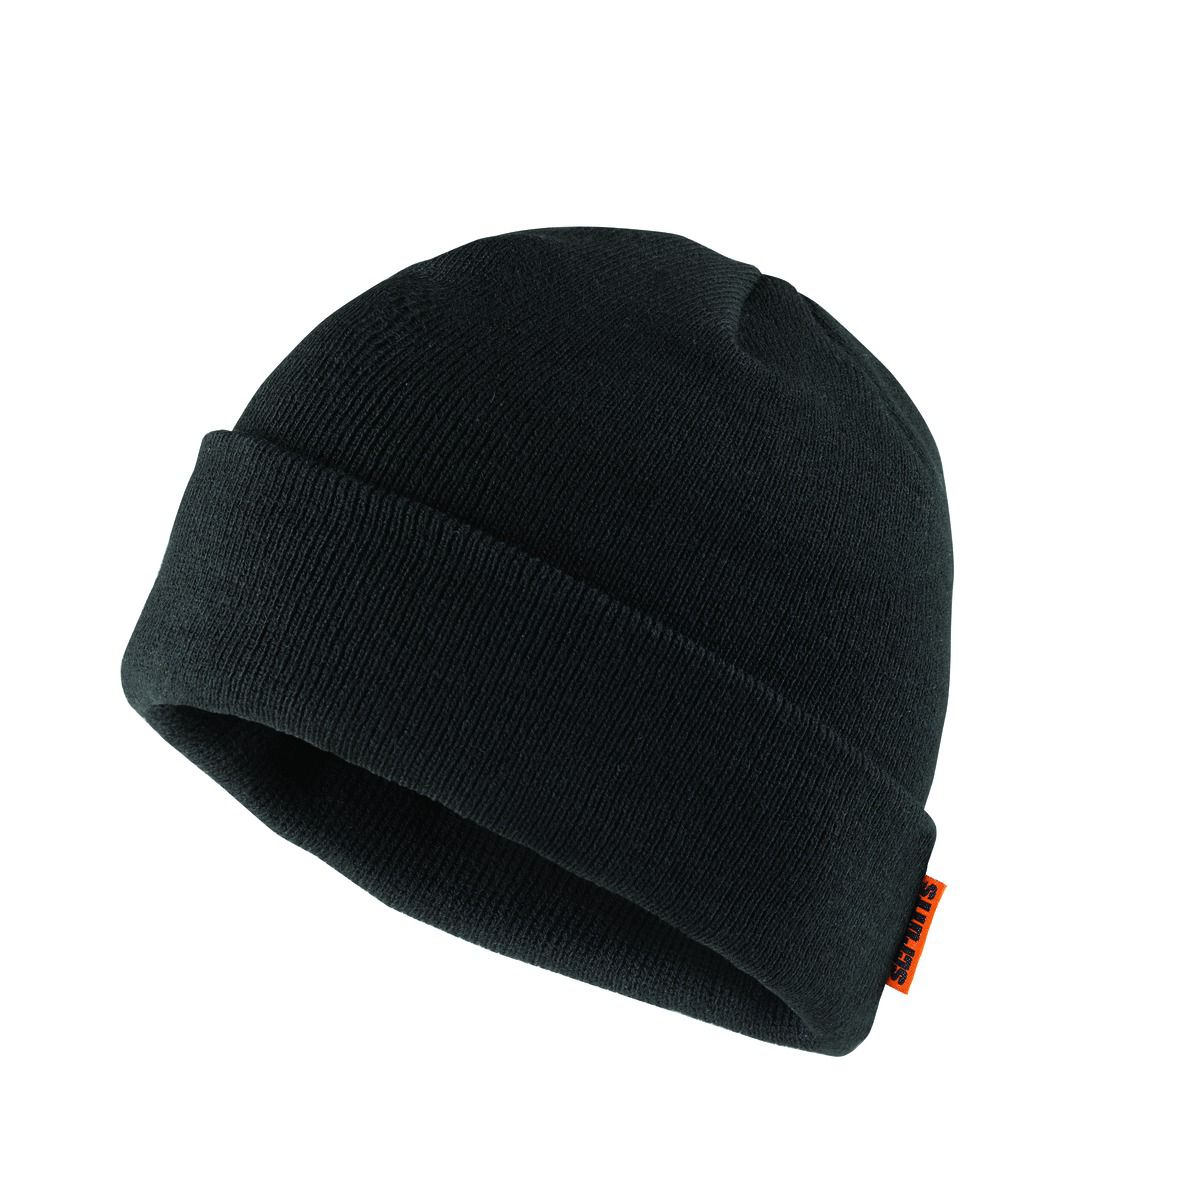 Image of Scruffs Knitted Thinsulate Work Beanie Hat Black - One Size